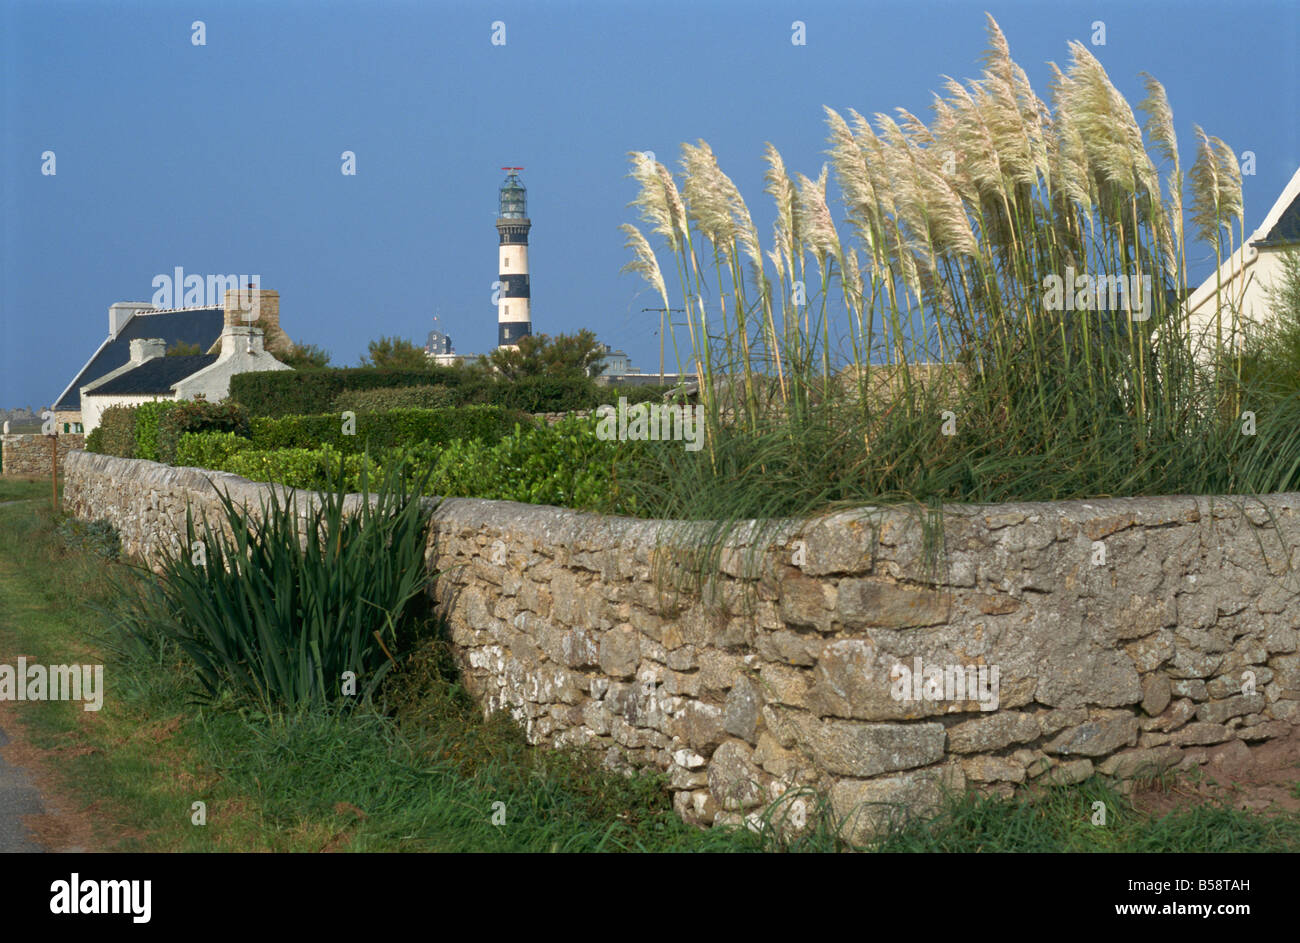 Landscape around Creac'h lighthouse, Ouessant Island, Finistere, Brittany, France, Europe Stock Photo